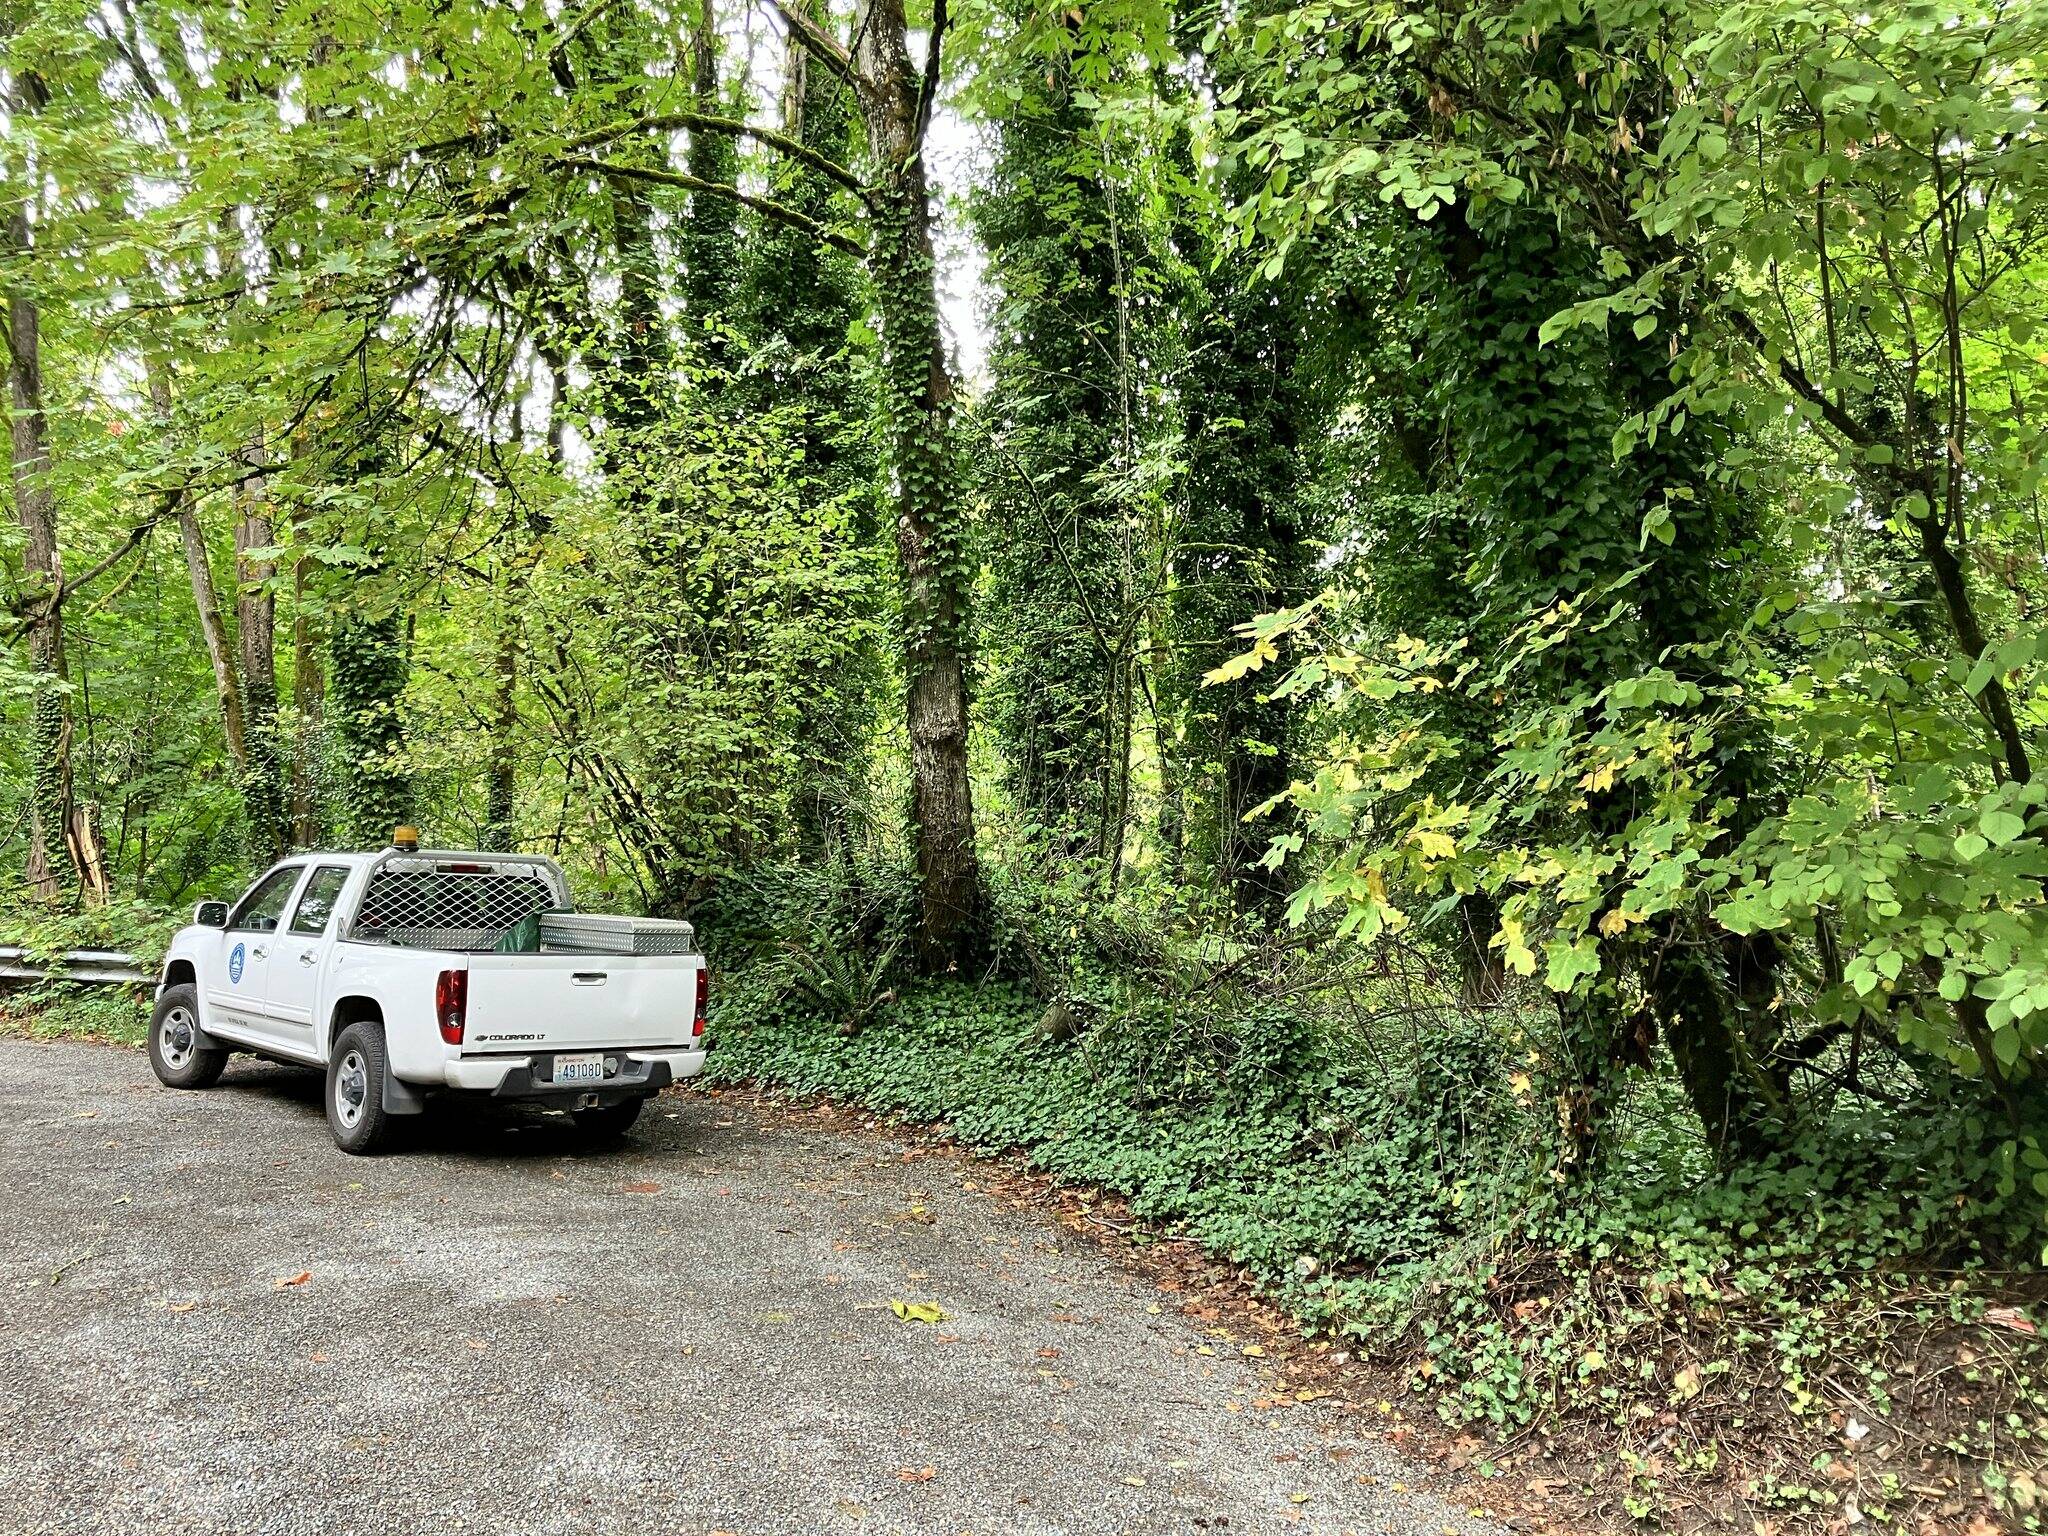 Invasive ivy removal work will occur in the coming months on the Island. Photo courtesy of the city of Mercer Island